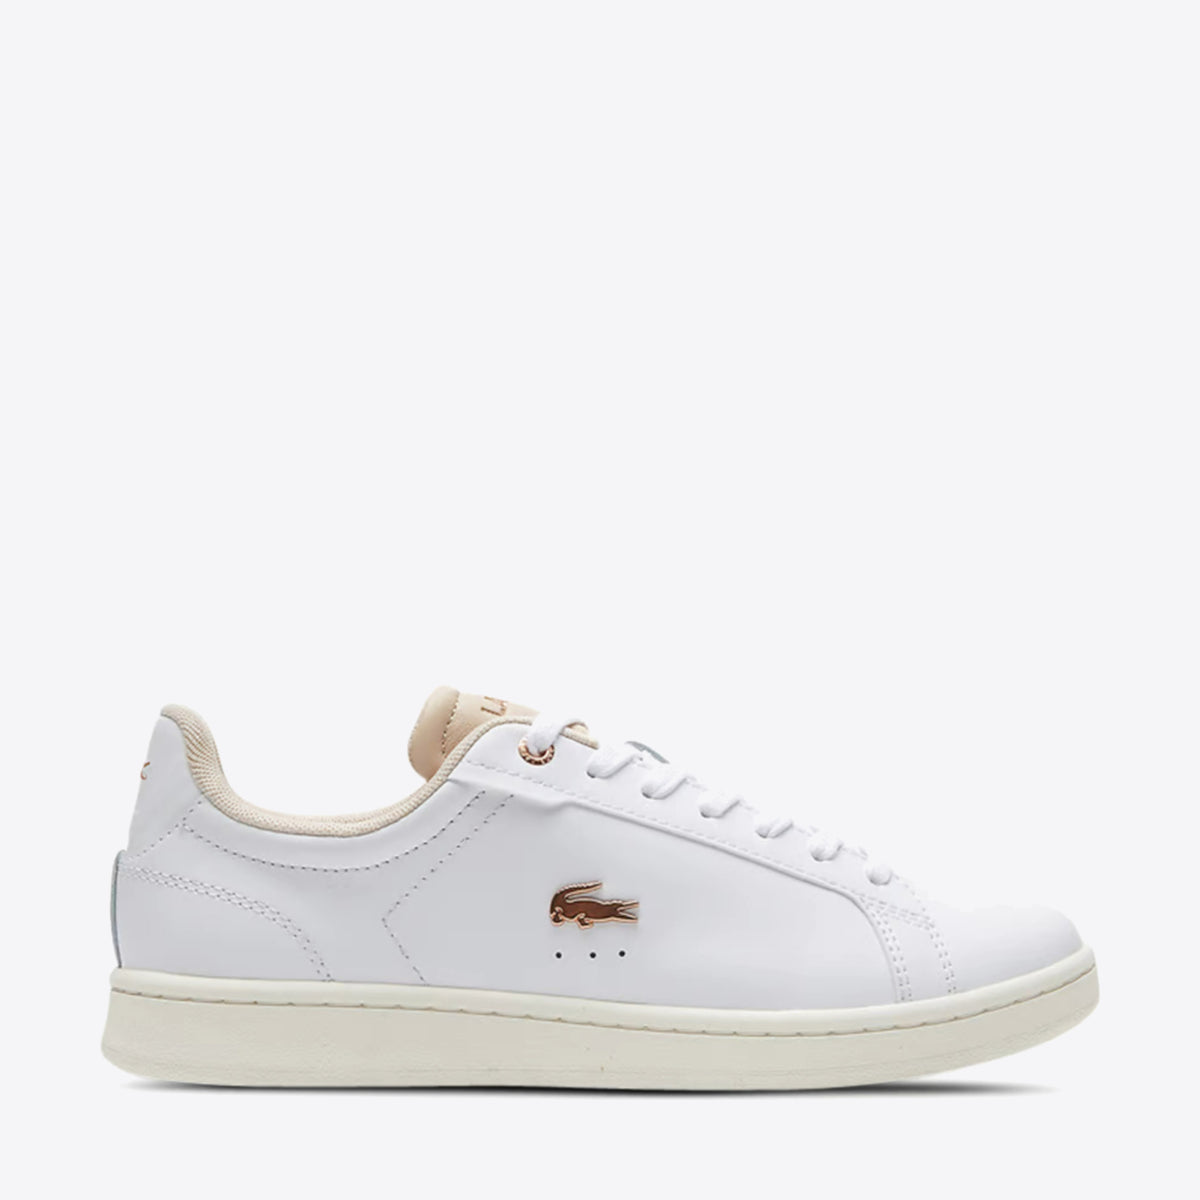 LACOSTE Carnaby Pro White/Off White - Image 1